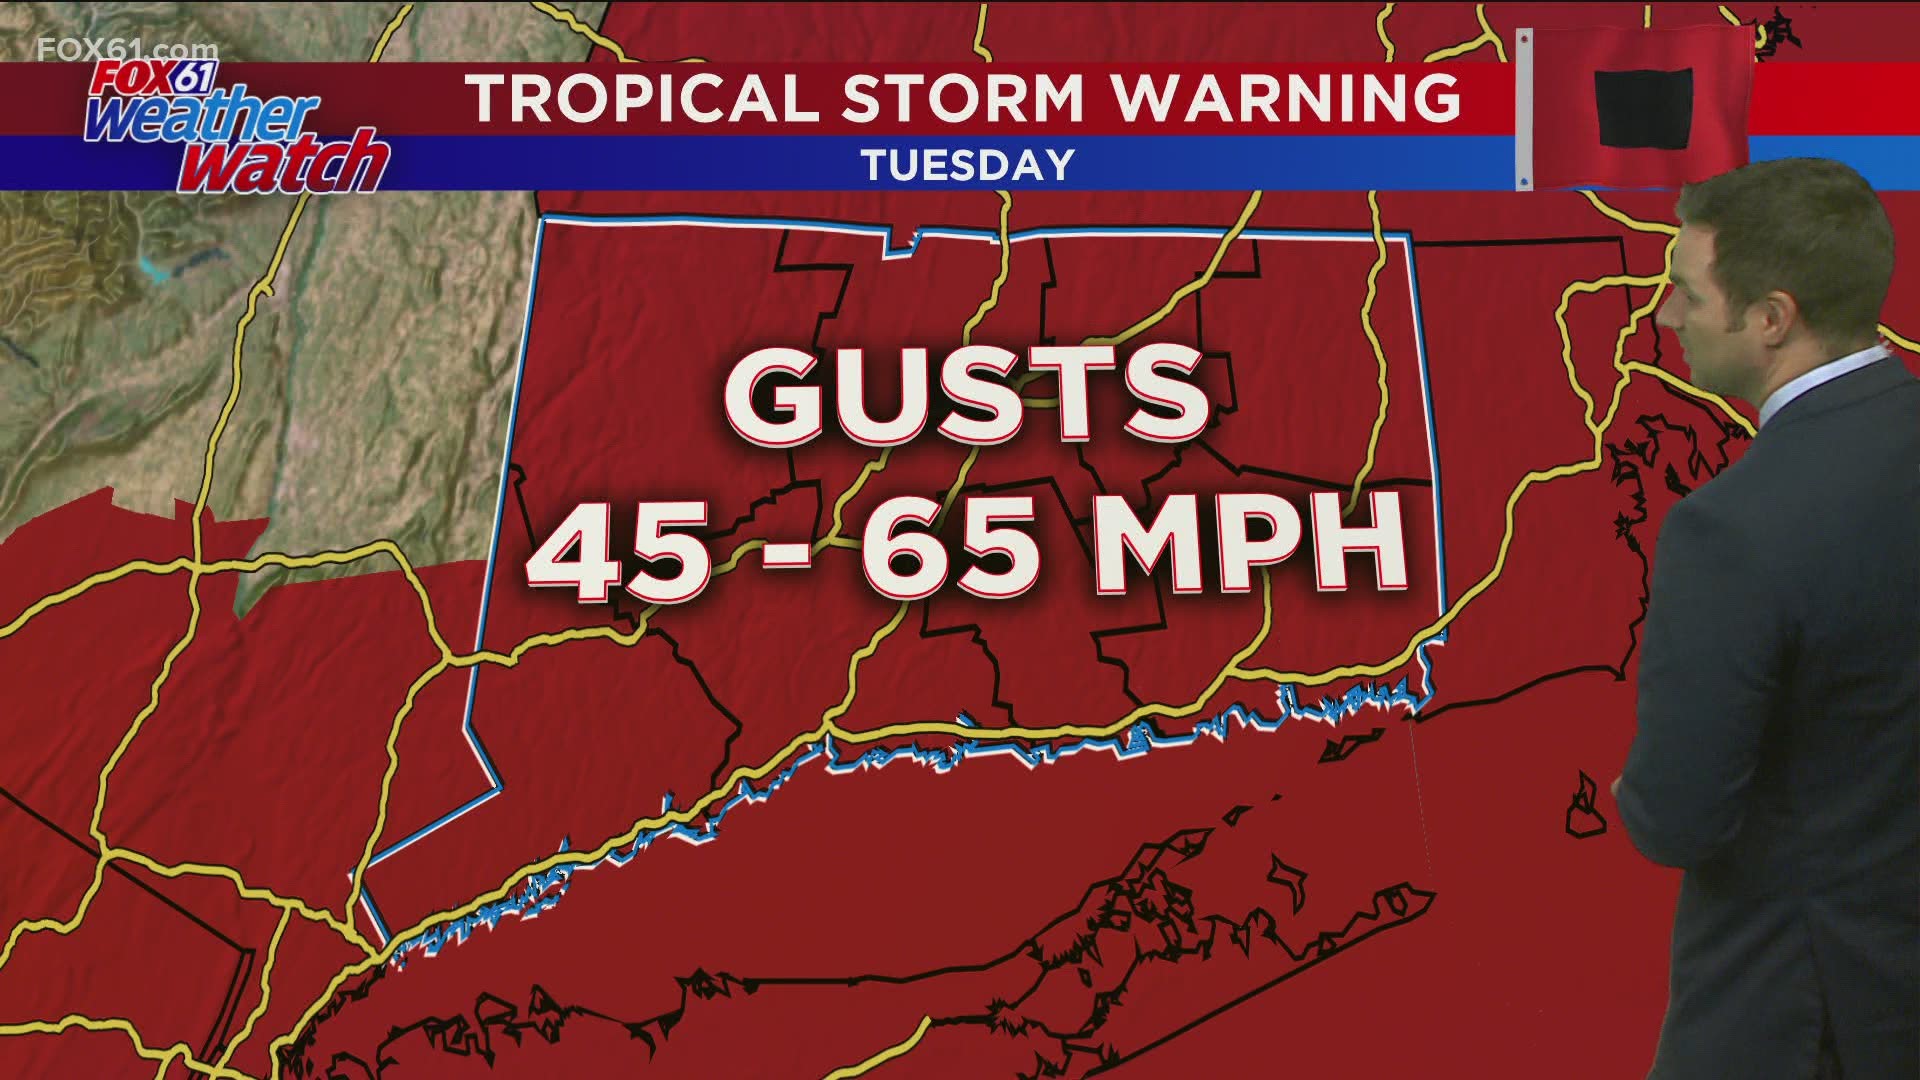 The storm will bring a few tropical downpours and strong/damaging winds this afternoon.